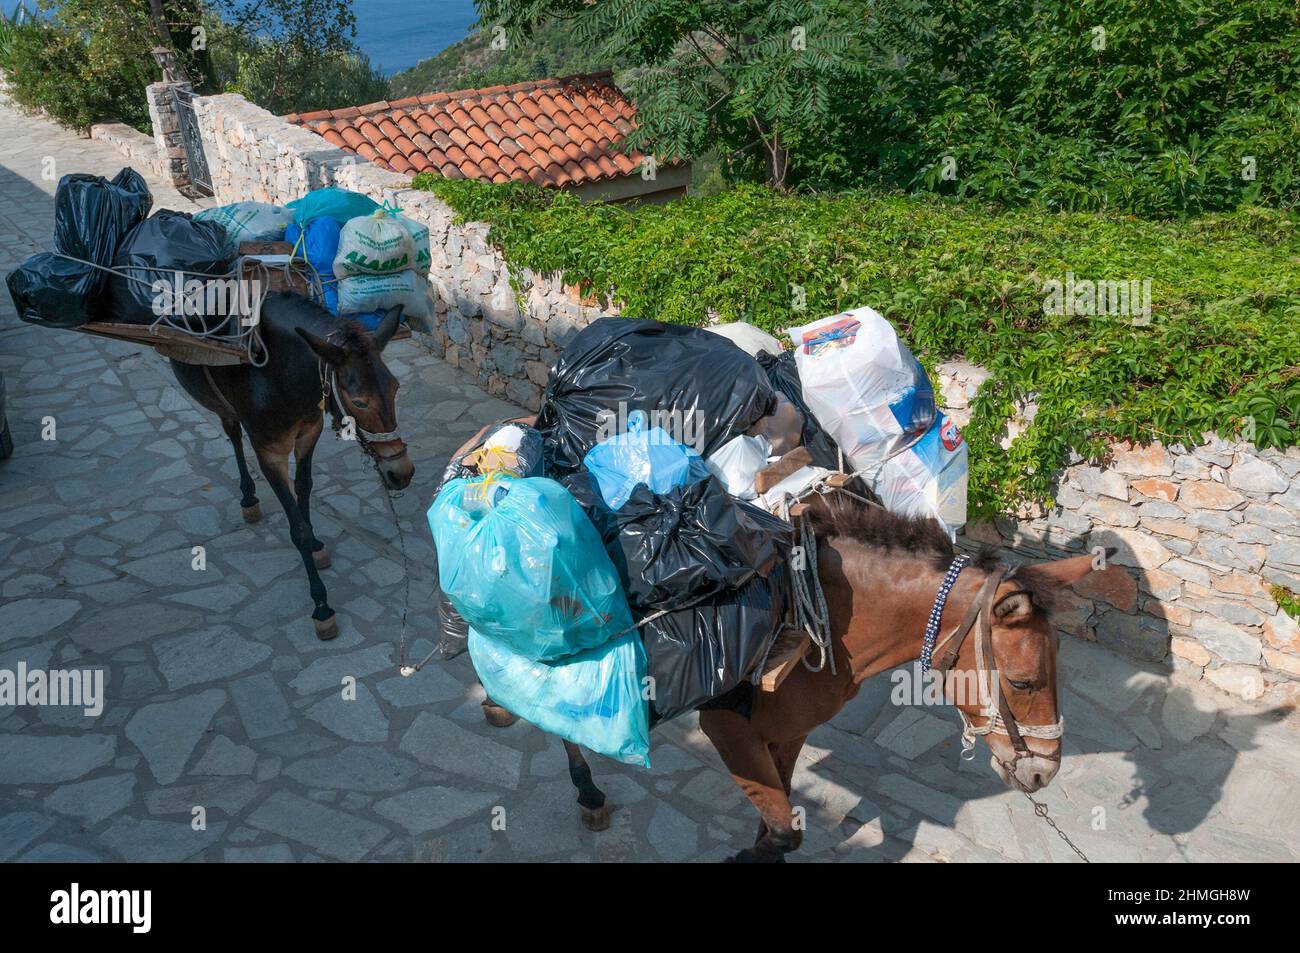 Mules loaded with rubbish and parcels walking on the greek island of Alonissos, in the Northan Sporades with the aegean sea in the background, Greece Stock Photo